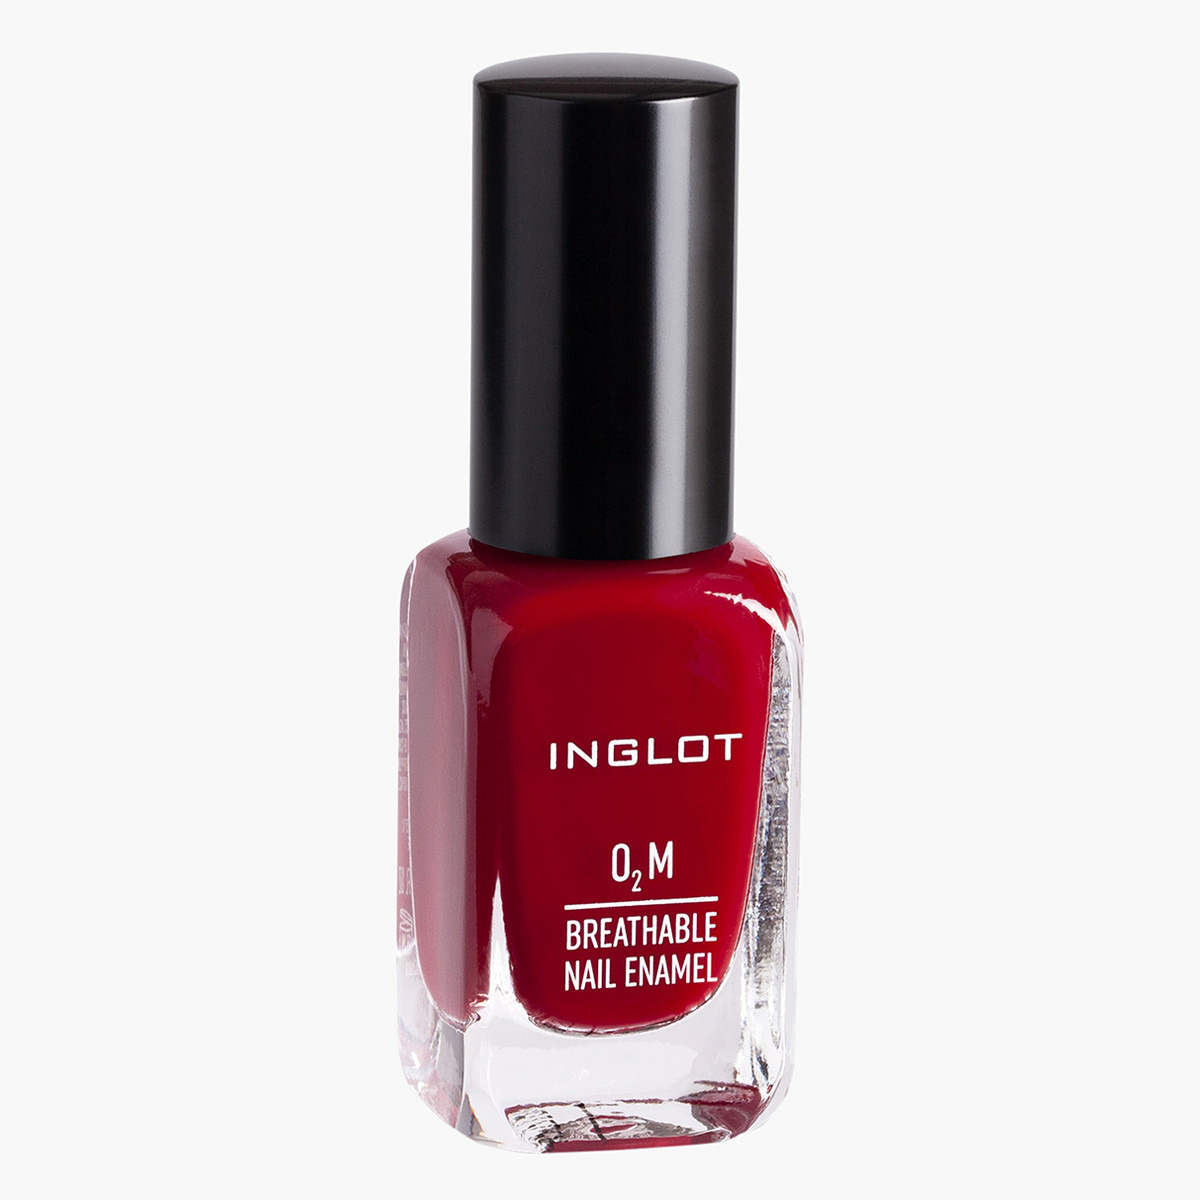 Testing the Water Permeability of Inglot O2M and Tuesday in Love Nail  Polishes - YouTube